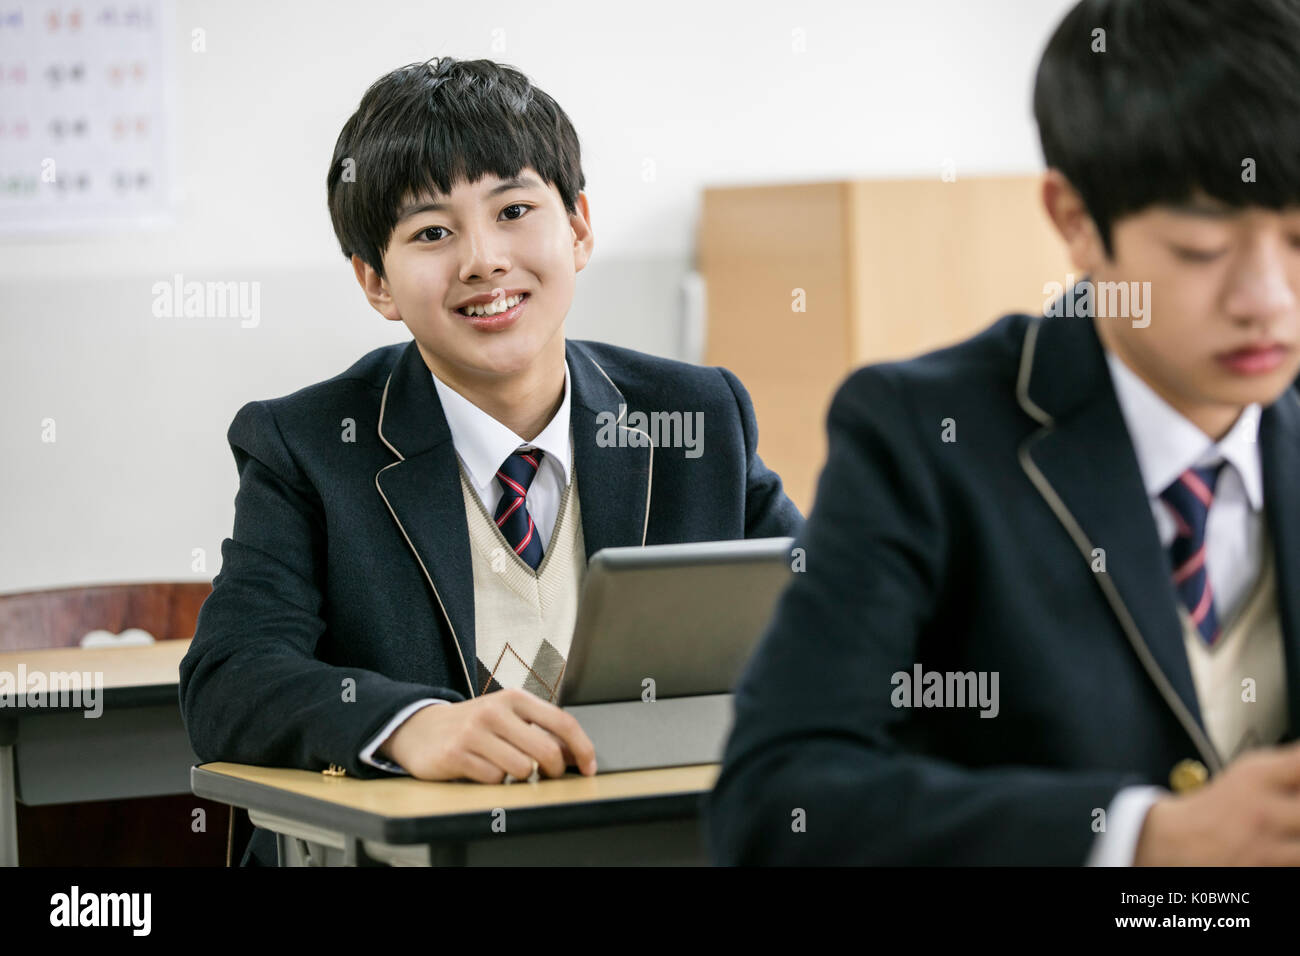 Portrait of smiling school boy and his classmate with electric tablets in classroom Stock Photo